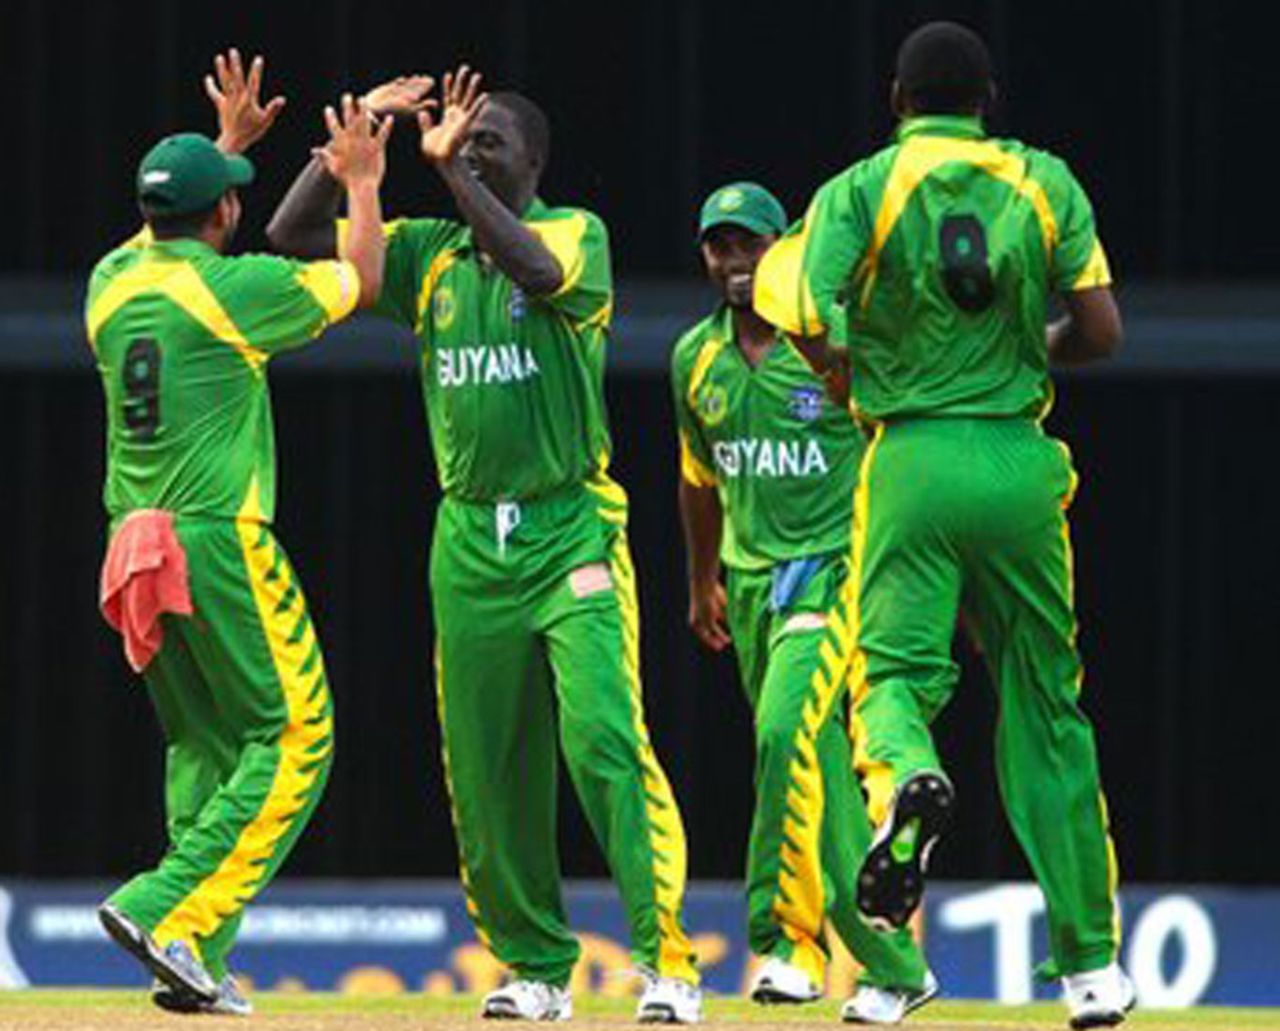 Lennox Cush celebrates after completing his hat-trick, Combined Campuses and Colleges v Guyana, Caribbean T20, Barbados, July 25, 2010